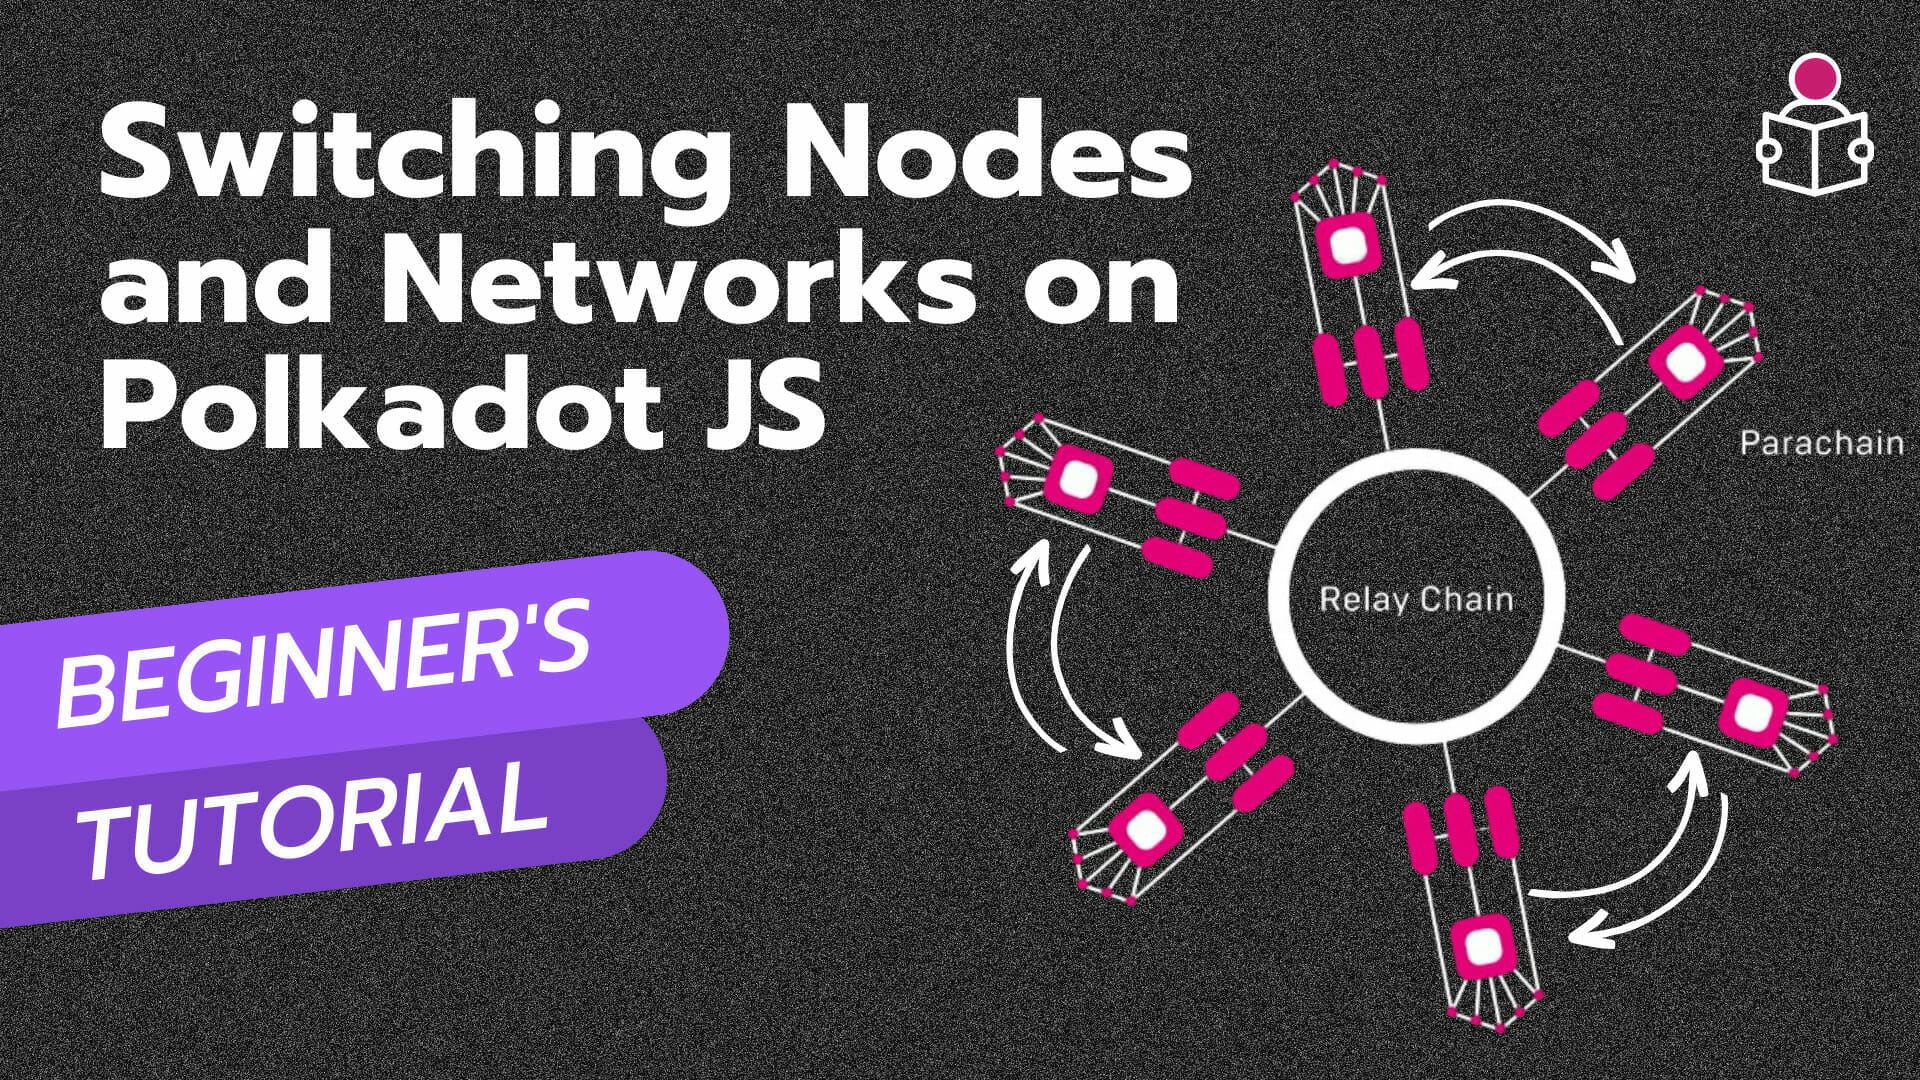 Switching Nodes and Networks on Polkadot JS - Describedot